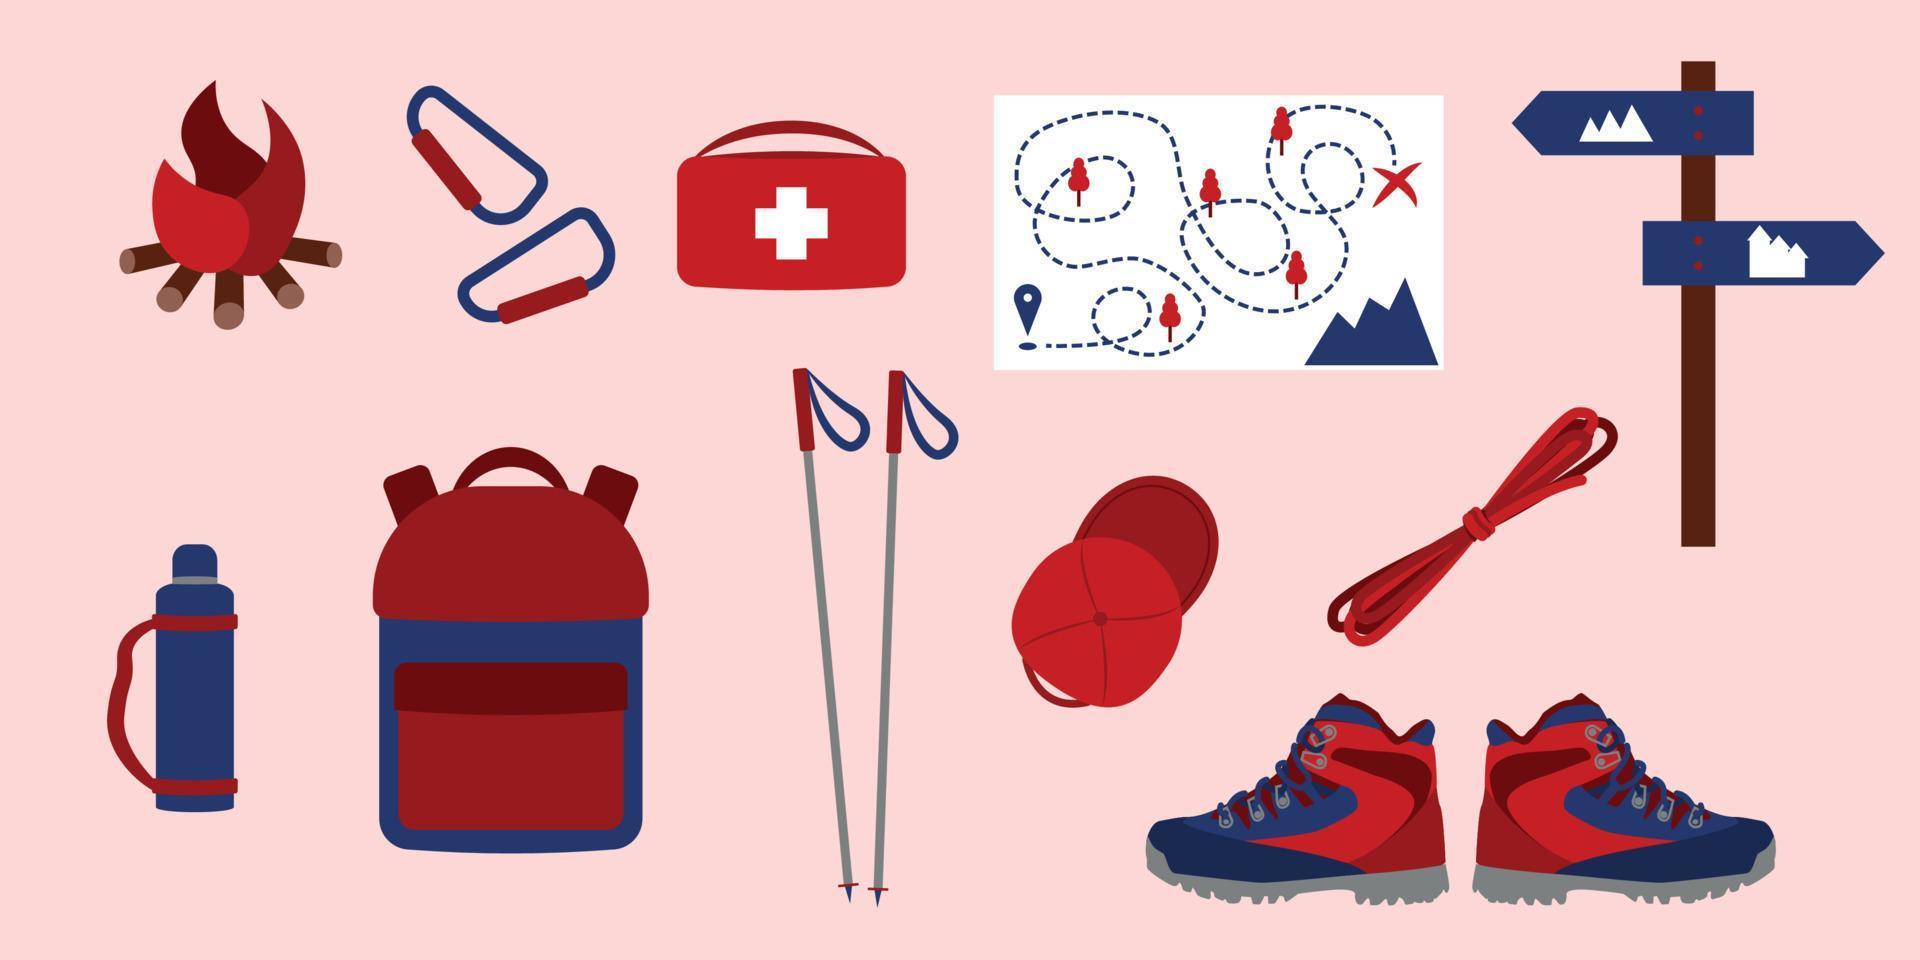 Hiking and travel equipment bundle. Set of boots, nordic walking sticks, map, thermos, cap, backpack, first aid kit, sign, fire, carbines and rope. Vector illustration in flat style.